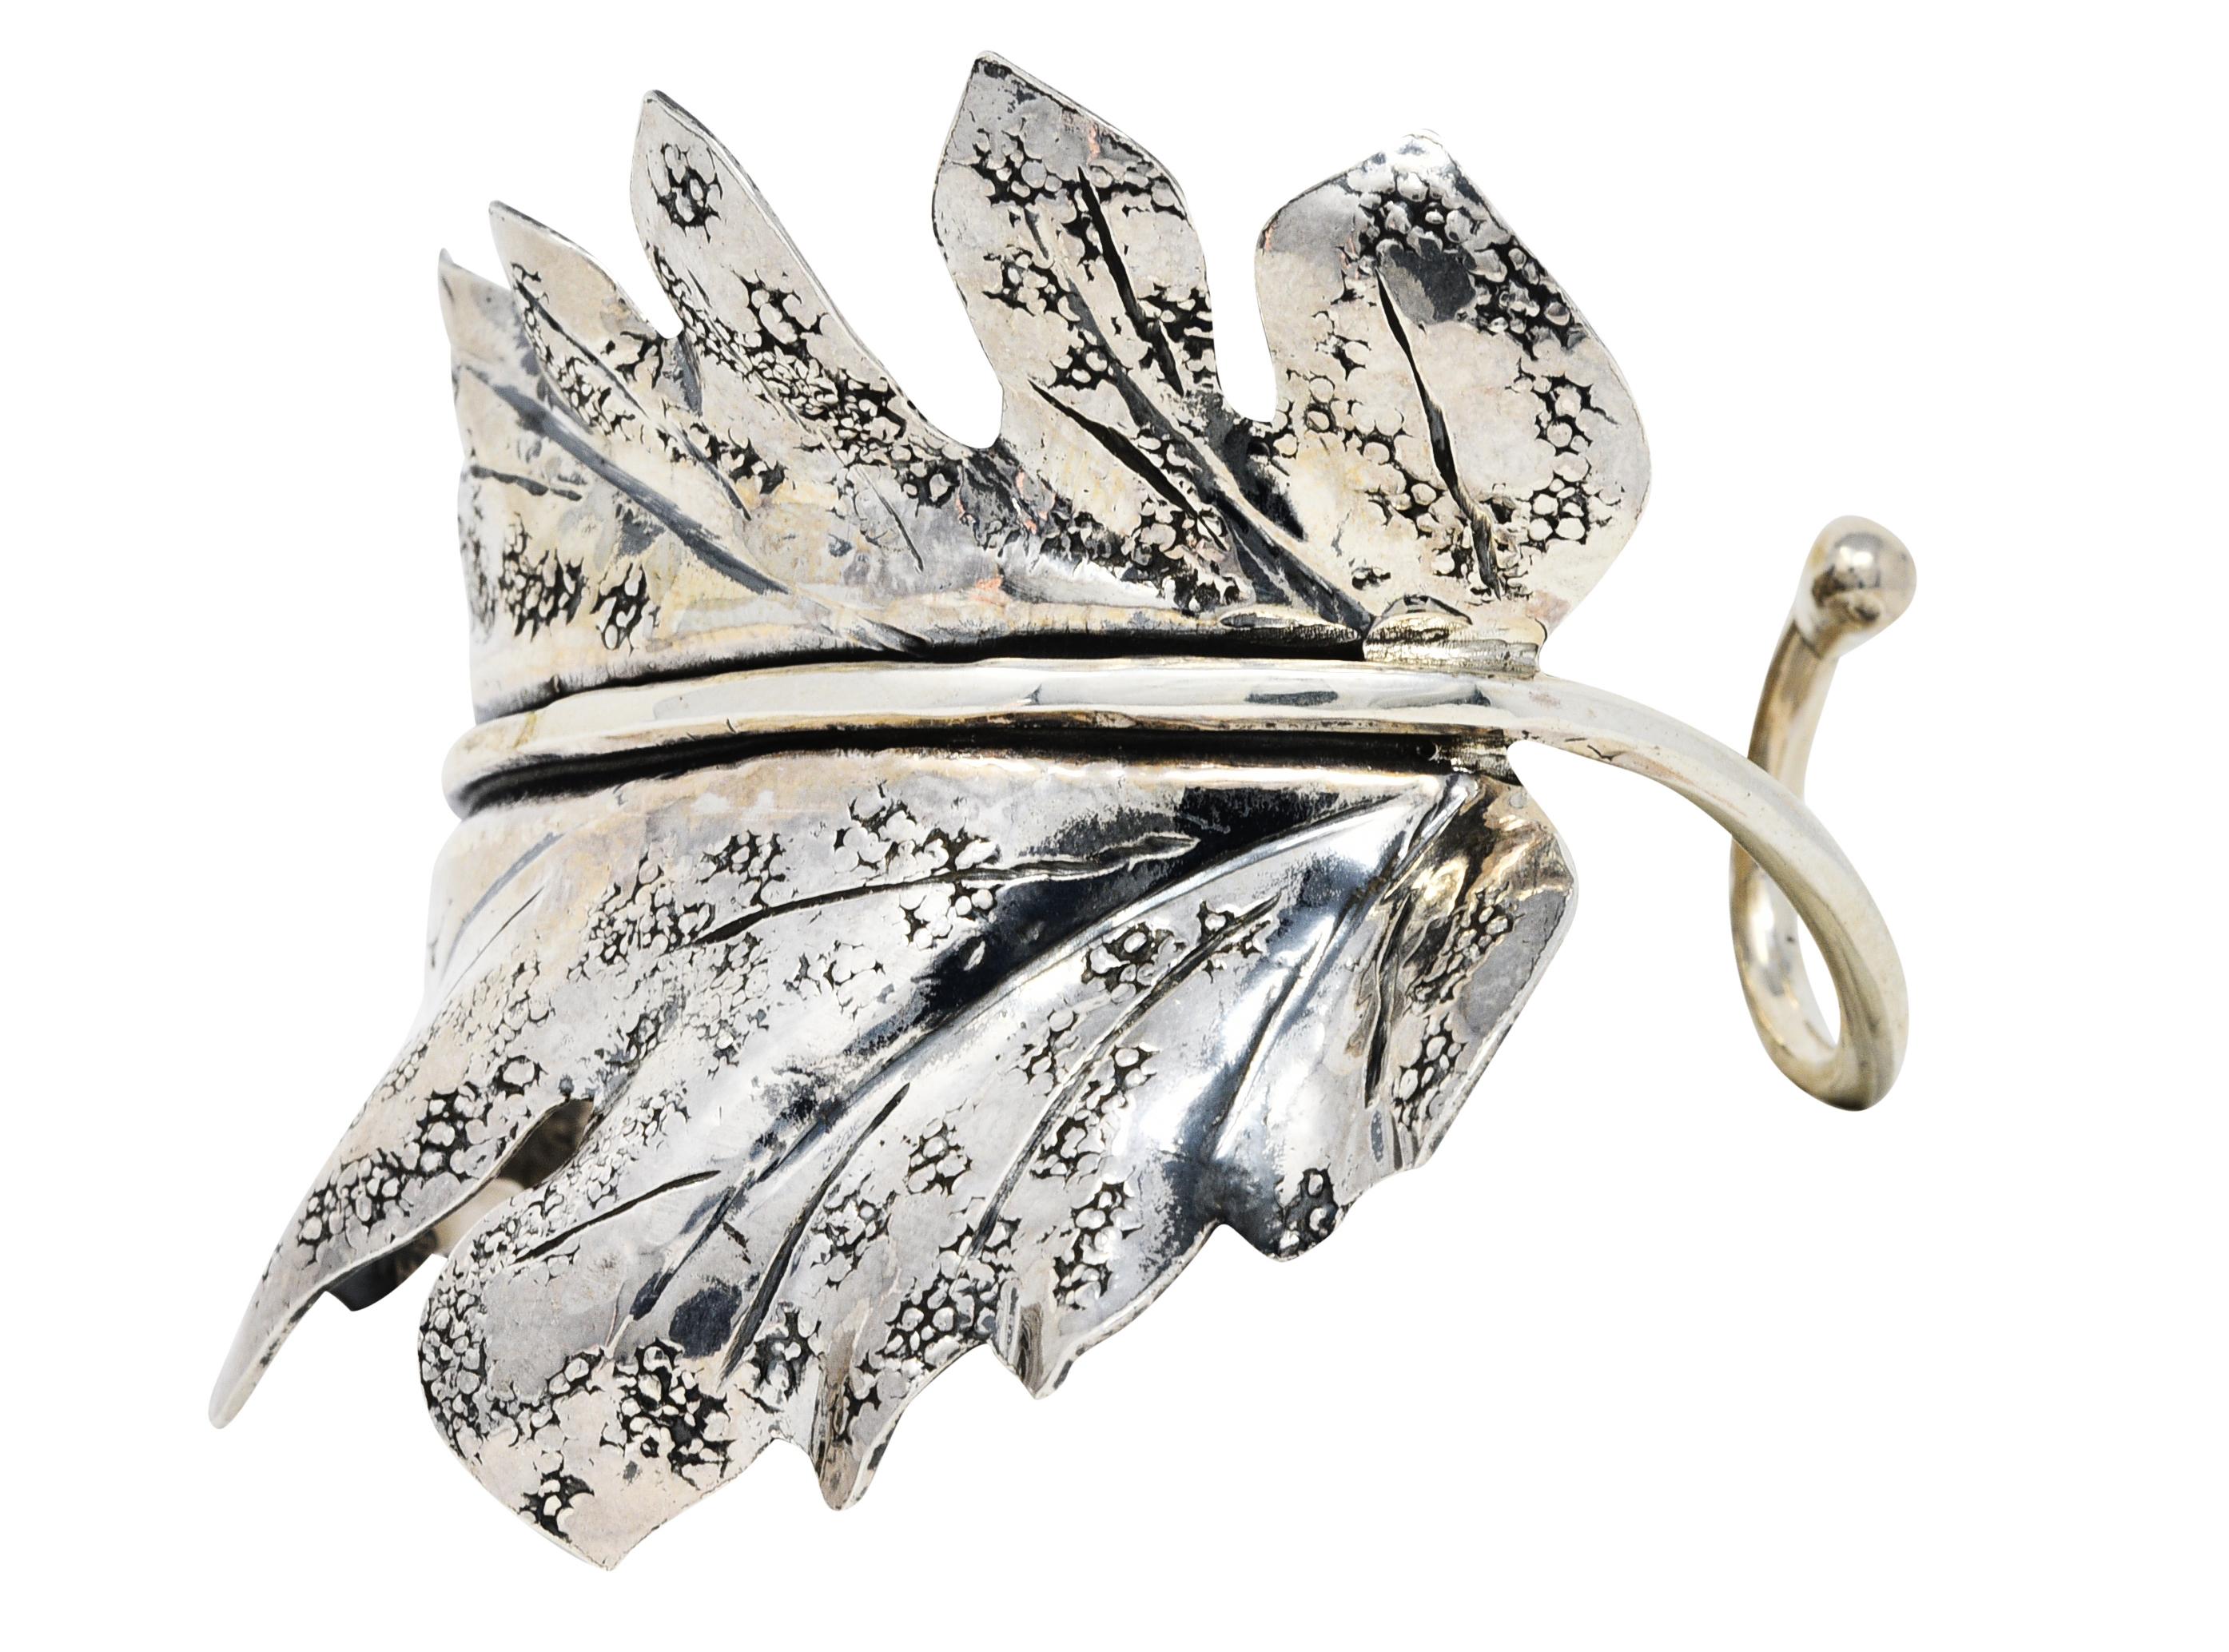 Large cuff bracelet is designed as a curved tomato leaf

Texturous with deep veining

Stamped Italy with Italian assay marks for sterling silver

Signed Buccellati

From the vintage Prestigi collection - circa 1970s

Prestigi designs are derived